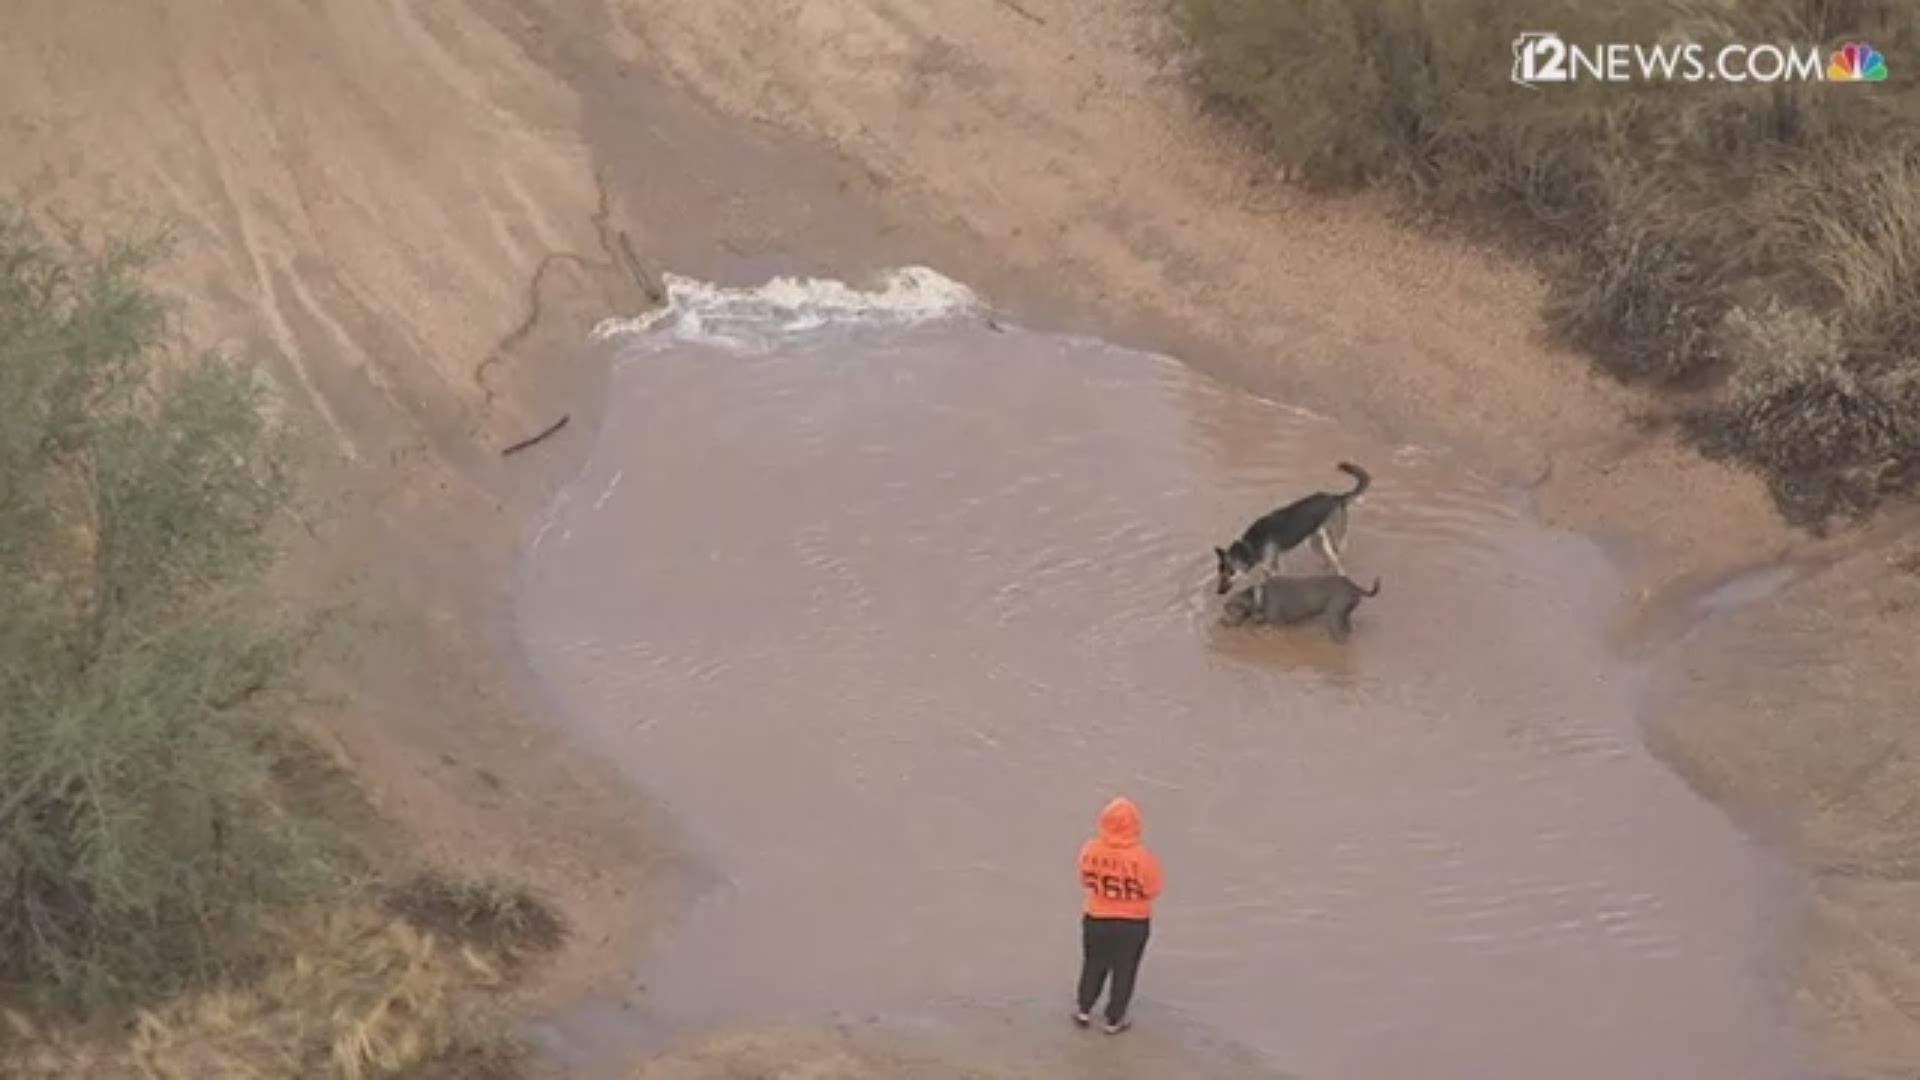 Sky 12 was over 12 News Wednesday morning when it caught two dogs enjoying the cloudy, rainy weather. Not only did they play in a huge puddle they got to play fetch.